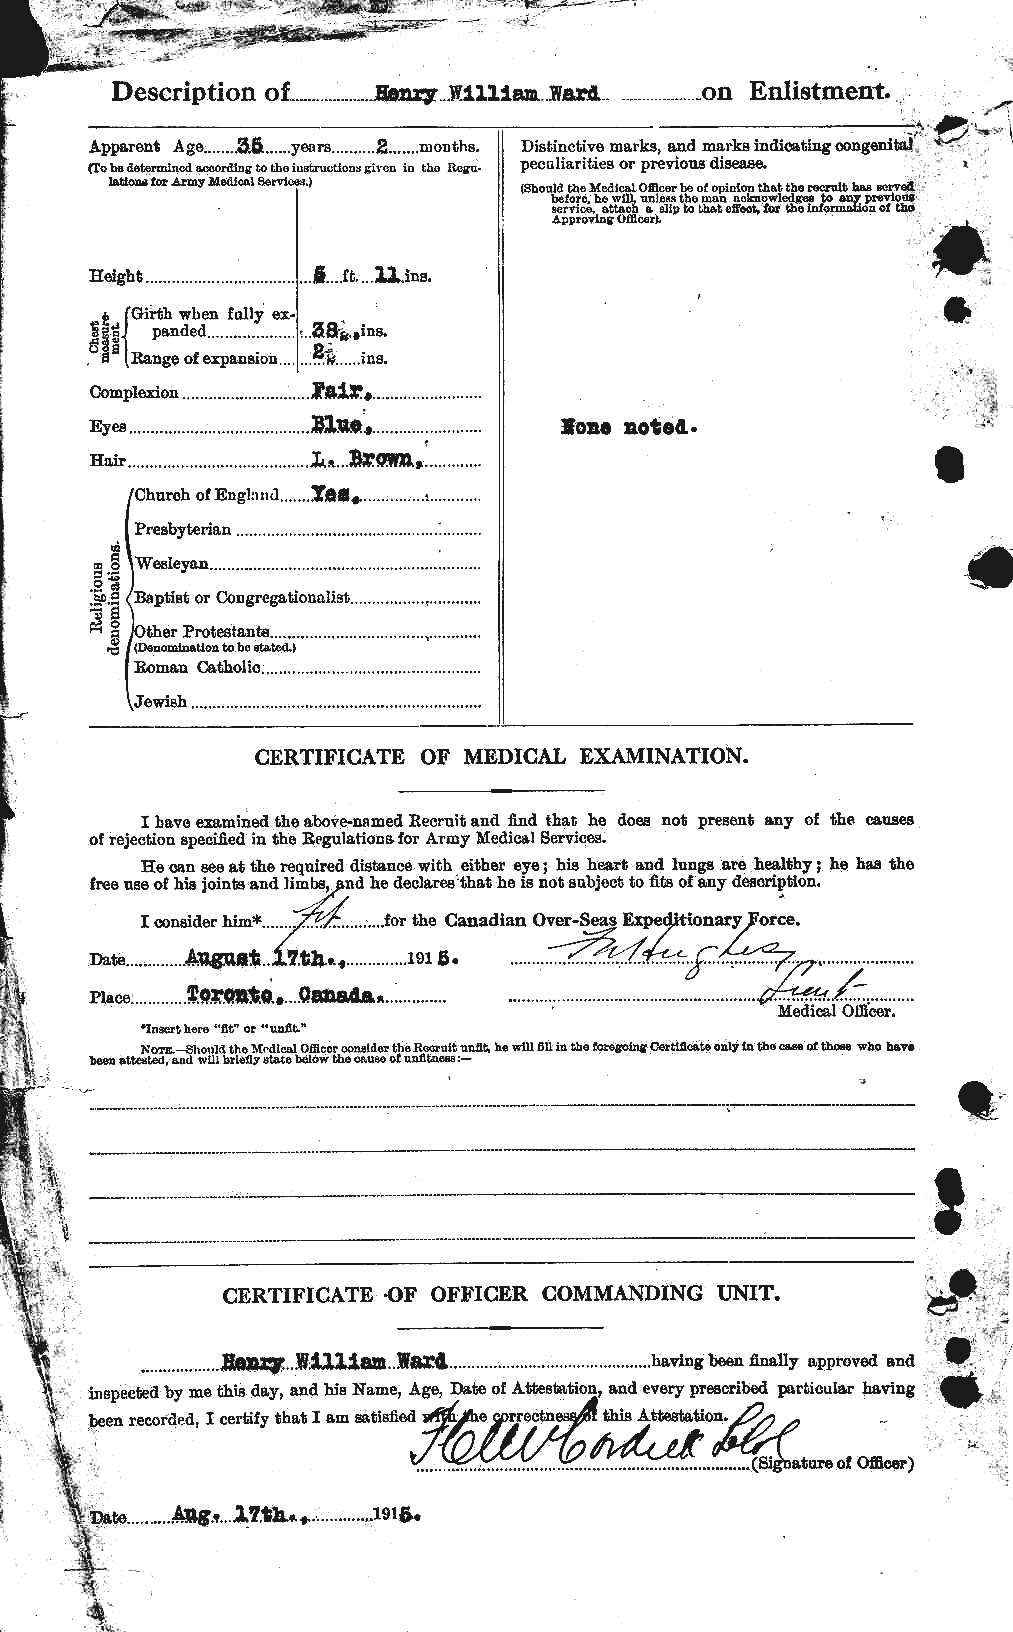 Personnel Records of the First World War - CEF 657846b